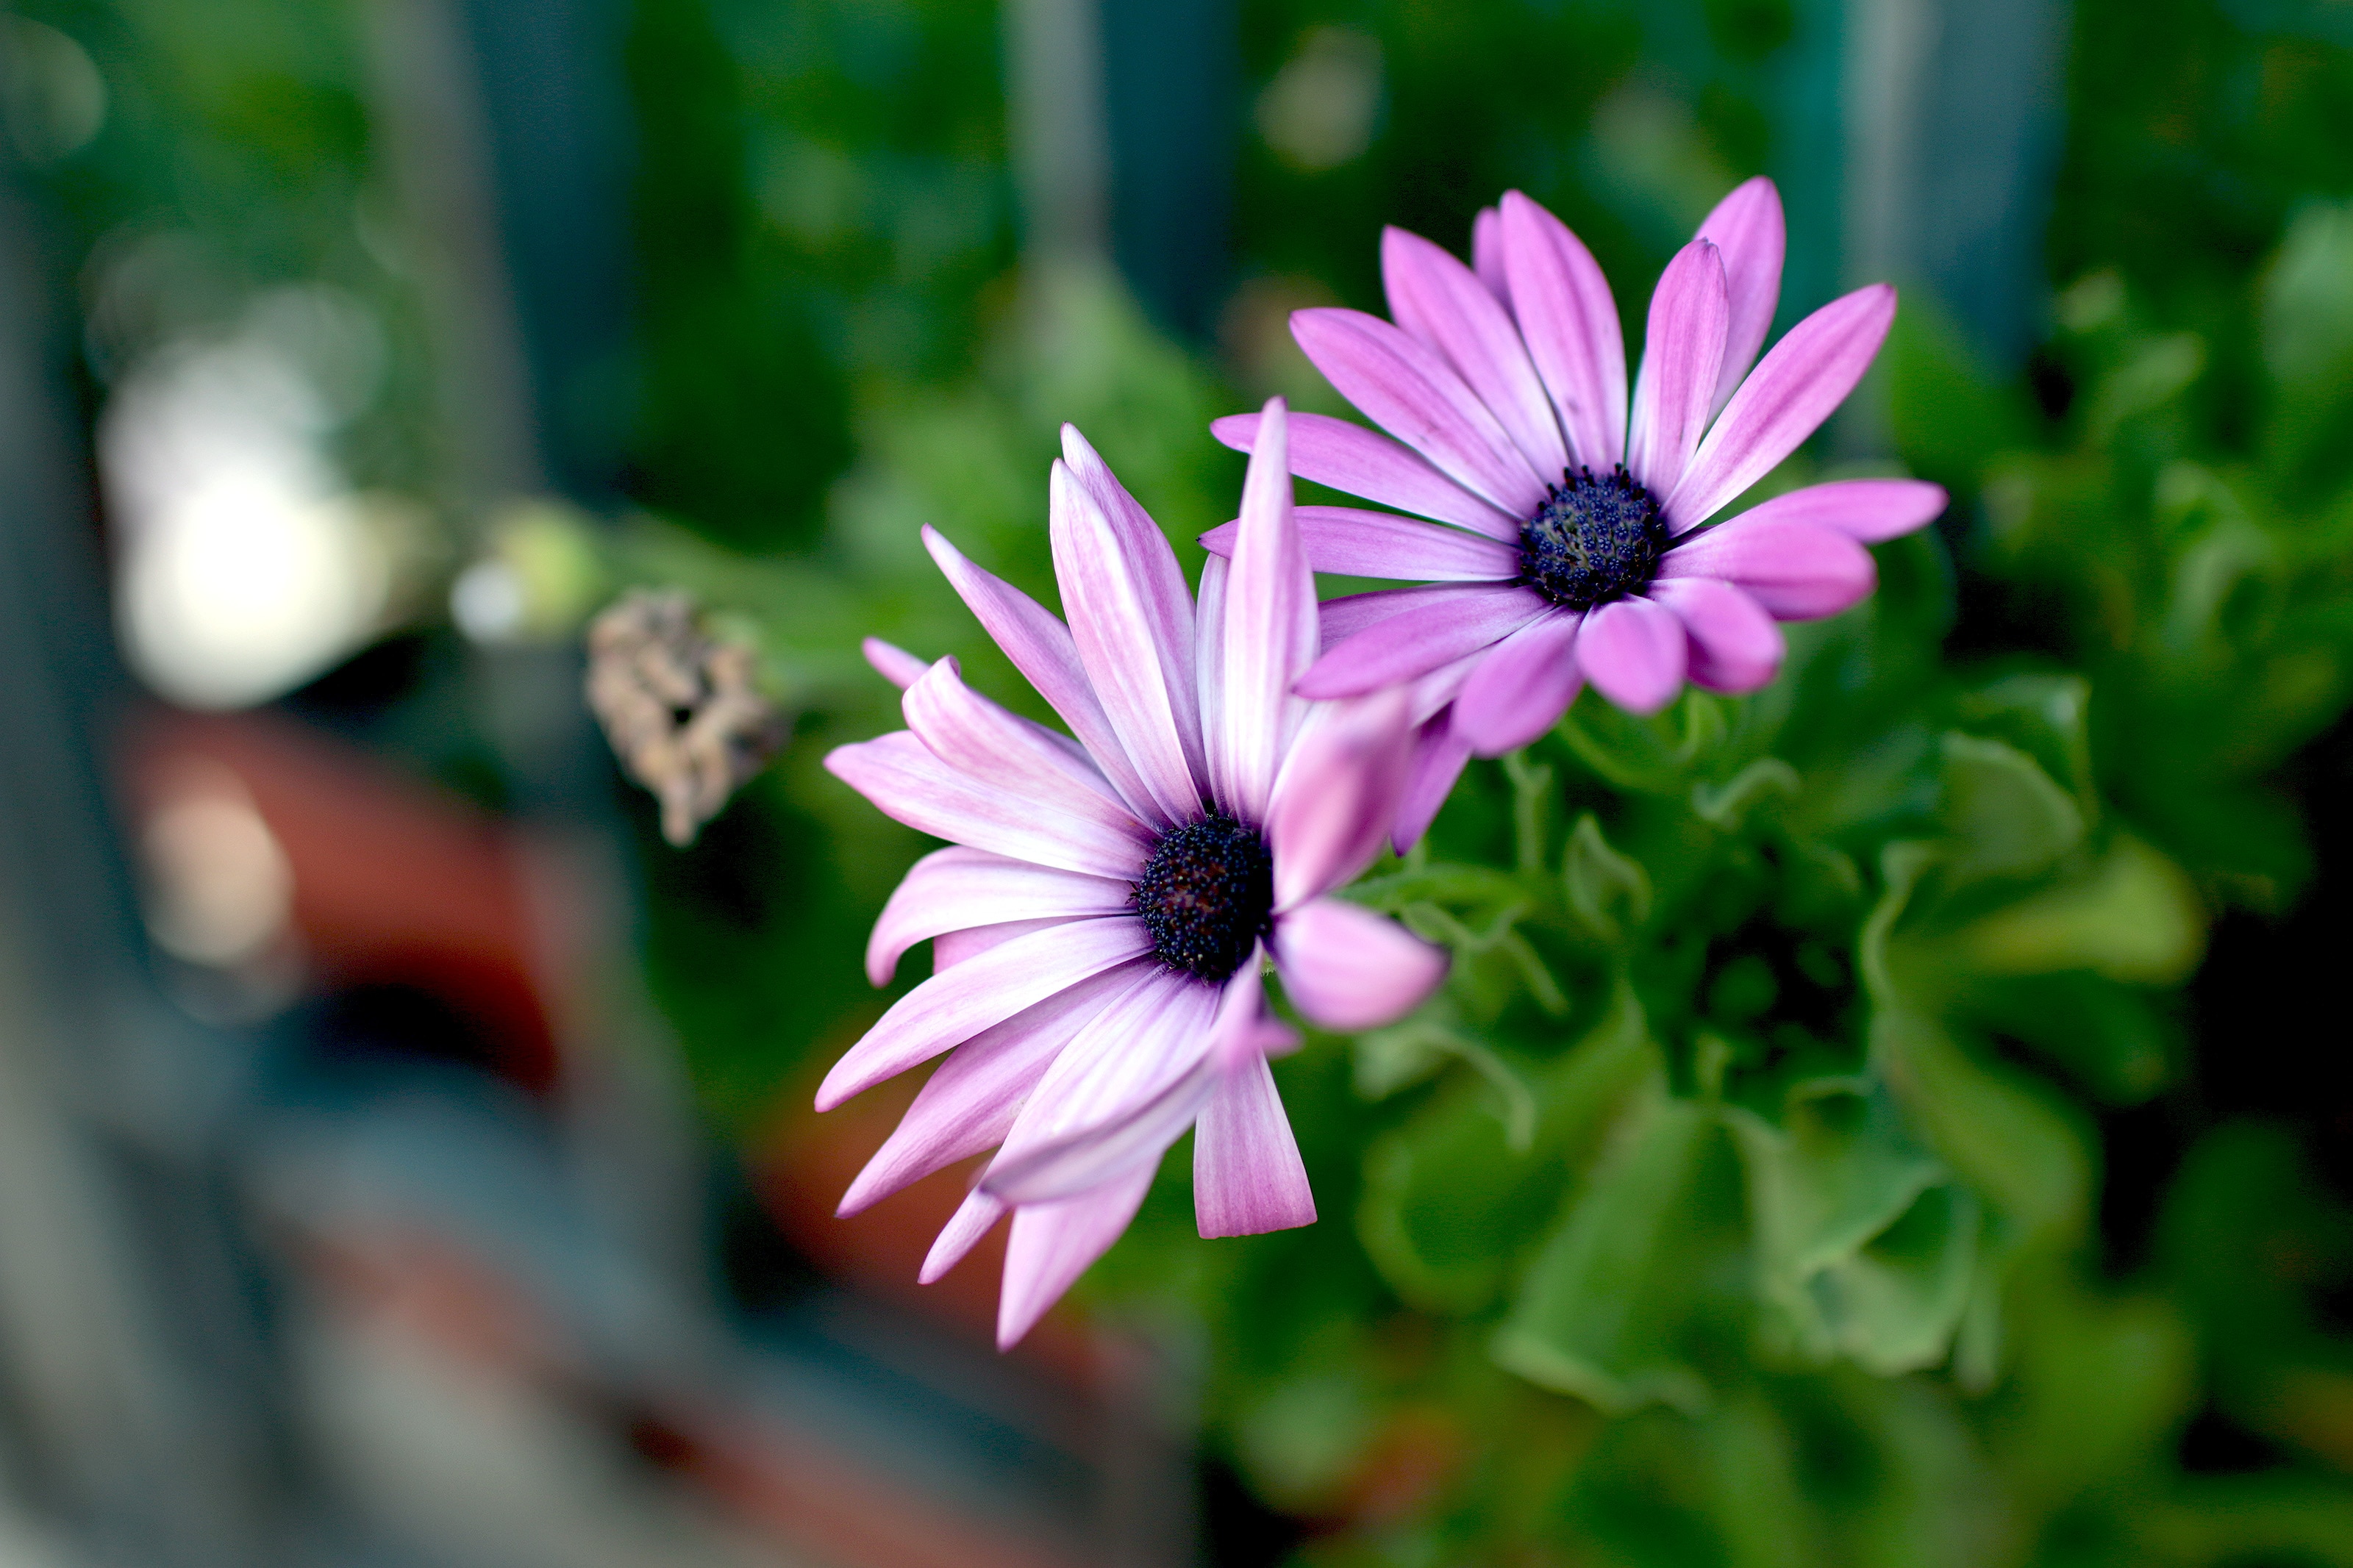 selective focus of 2 white-and-purple clustered petaled flowers